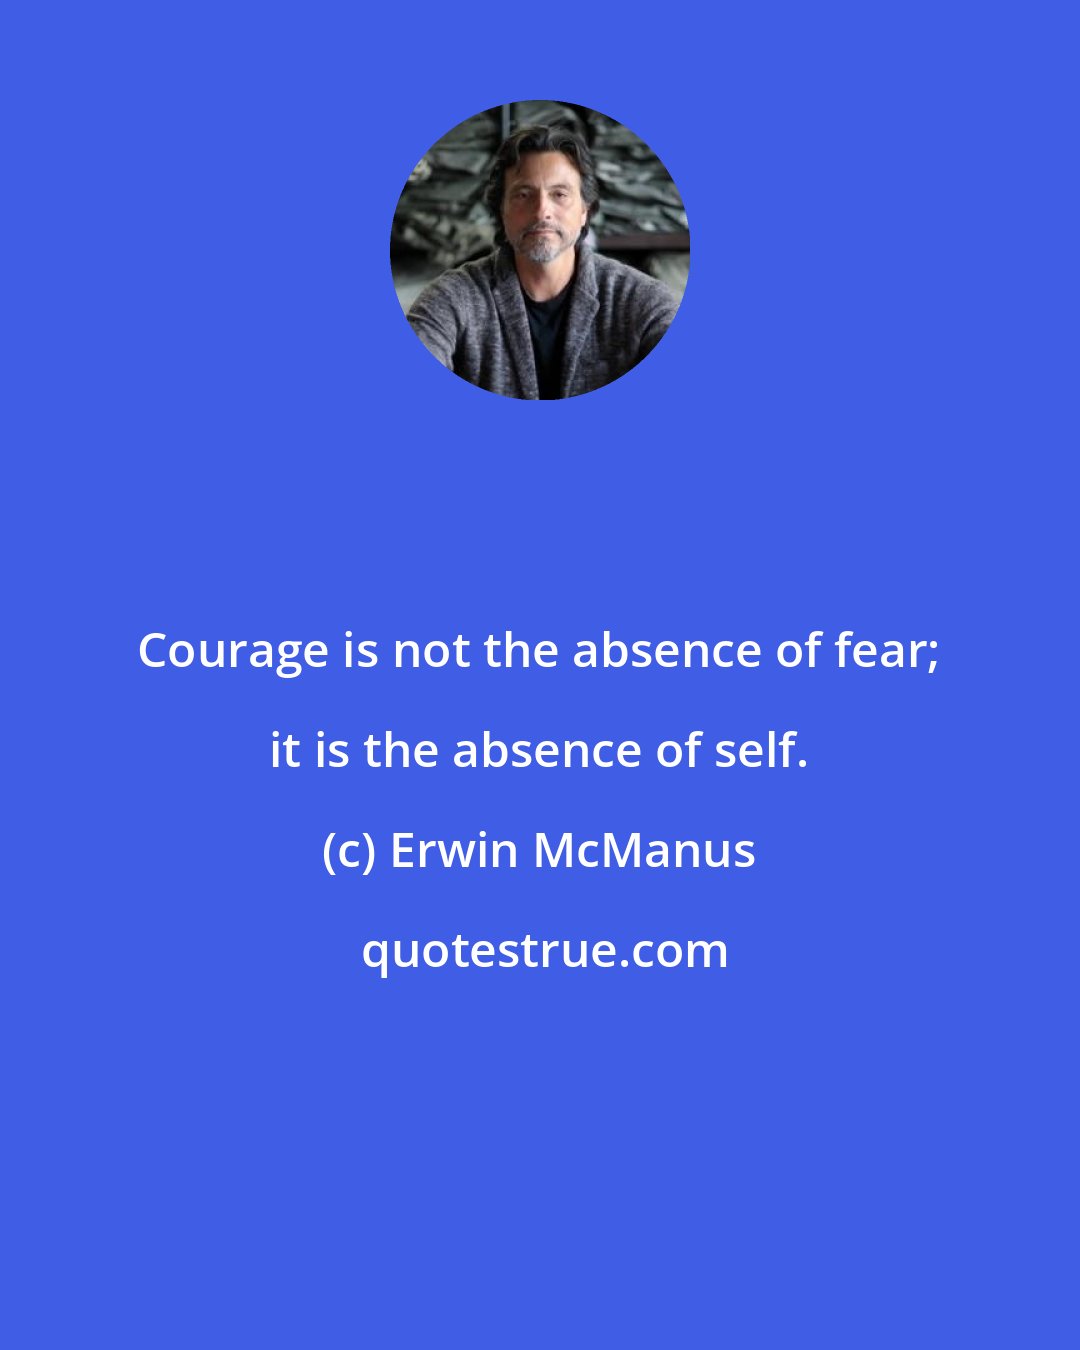 Erwin McManus: Courage is not the absence of fear; it is the absence of self.